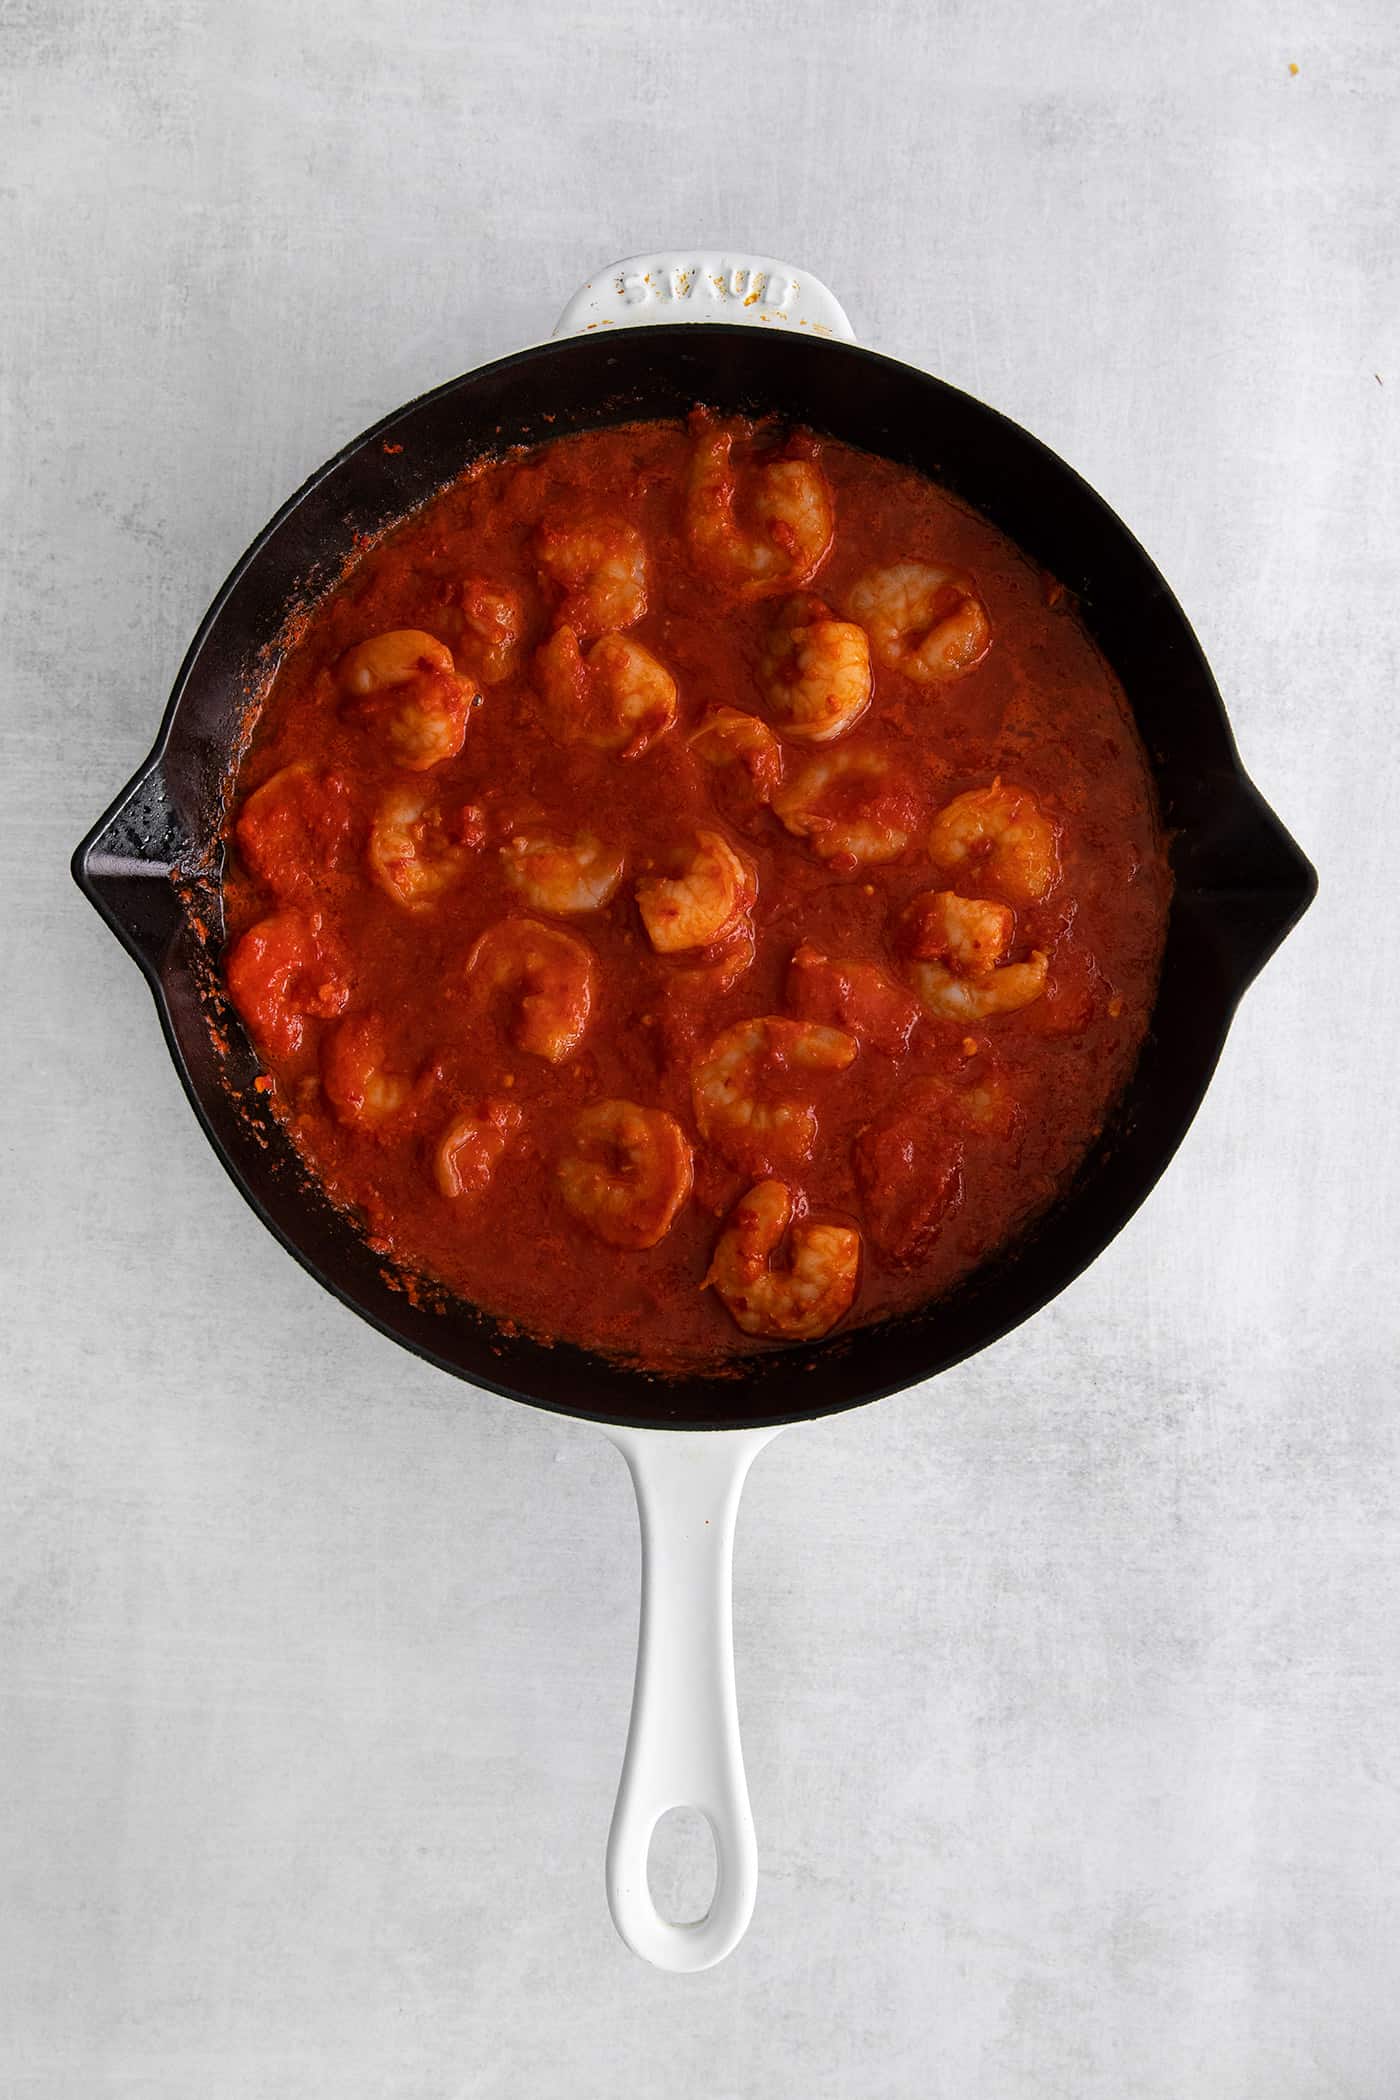 Overhead view of shrimp in a cast iron skillet with red sauce